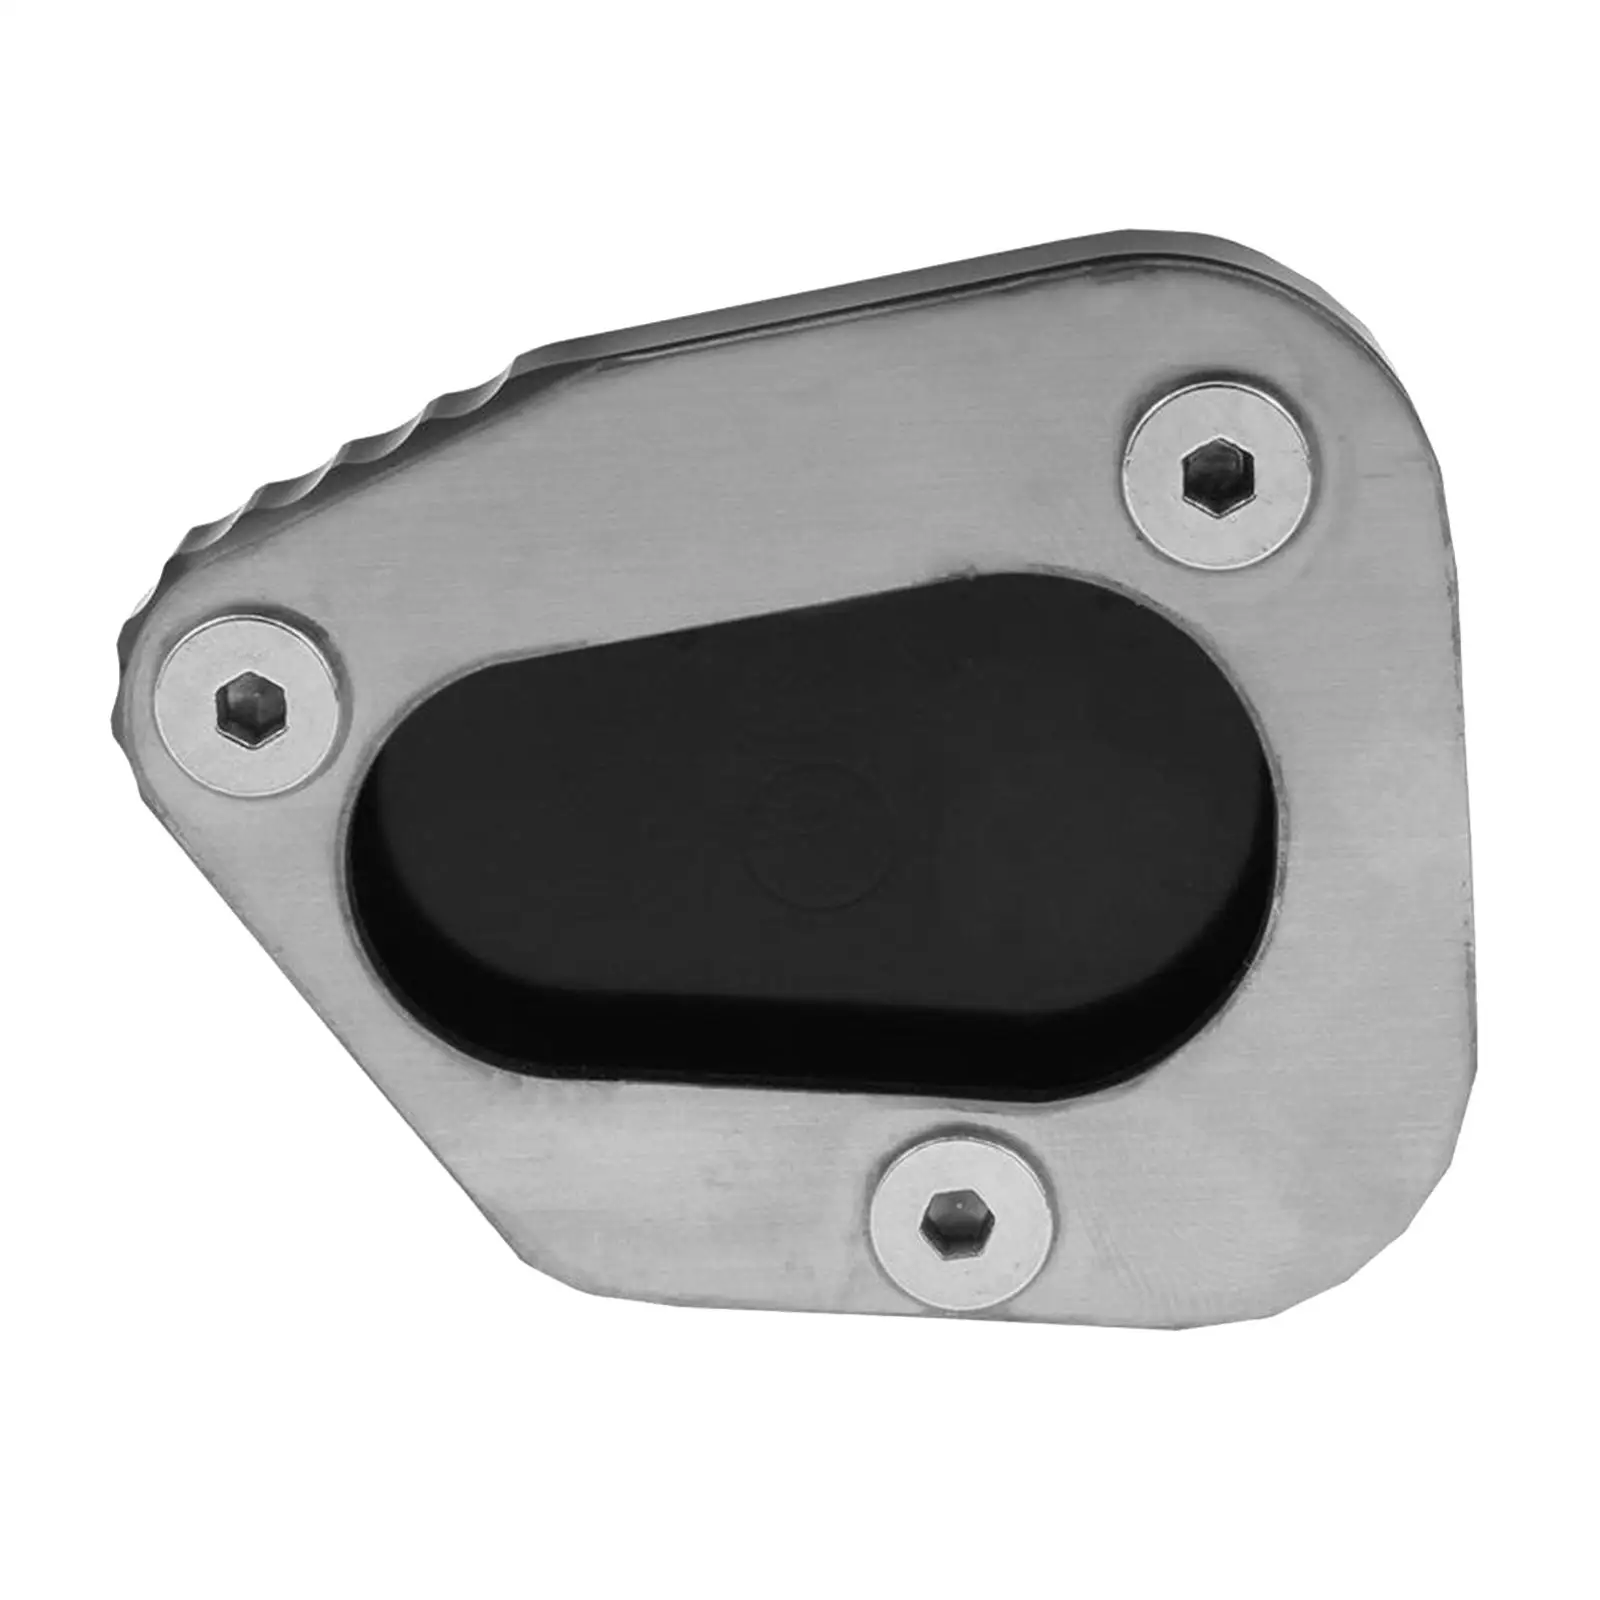 Non-Slip Kickstand Side Stand Extension Pad for YAMAHA FJR1300 2006-2017,Parts